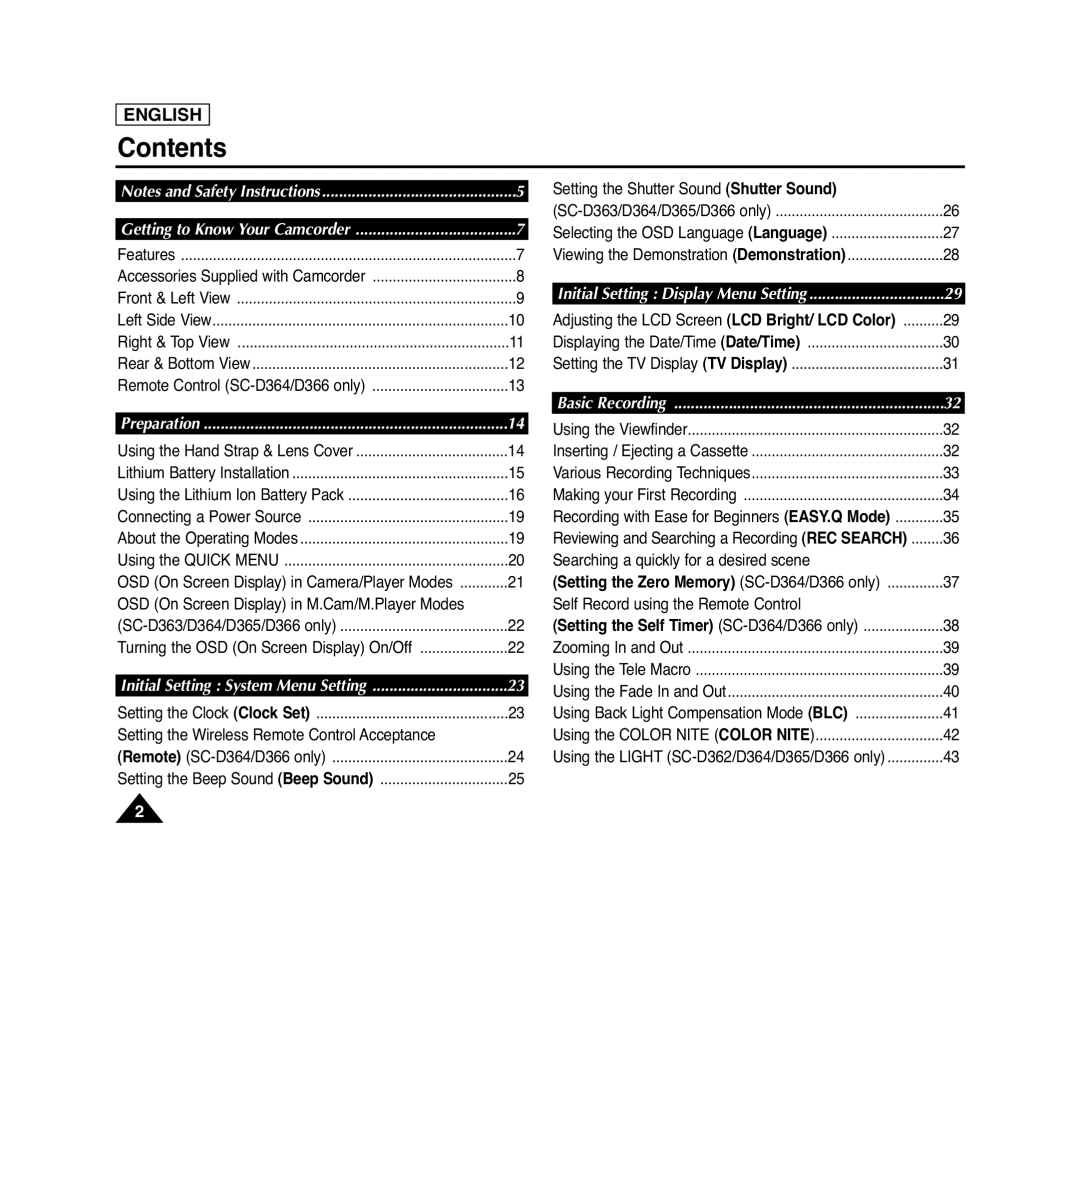 Samsung SC-D364, SC-D263 Contents, English, Notes and Safety Instructions, Getting to Know Your Camcorder, Basic Recording 